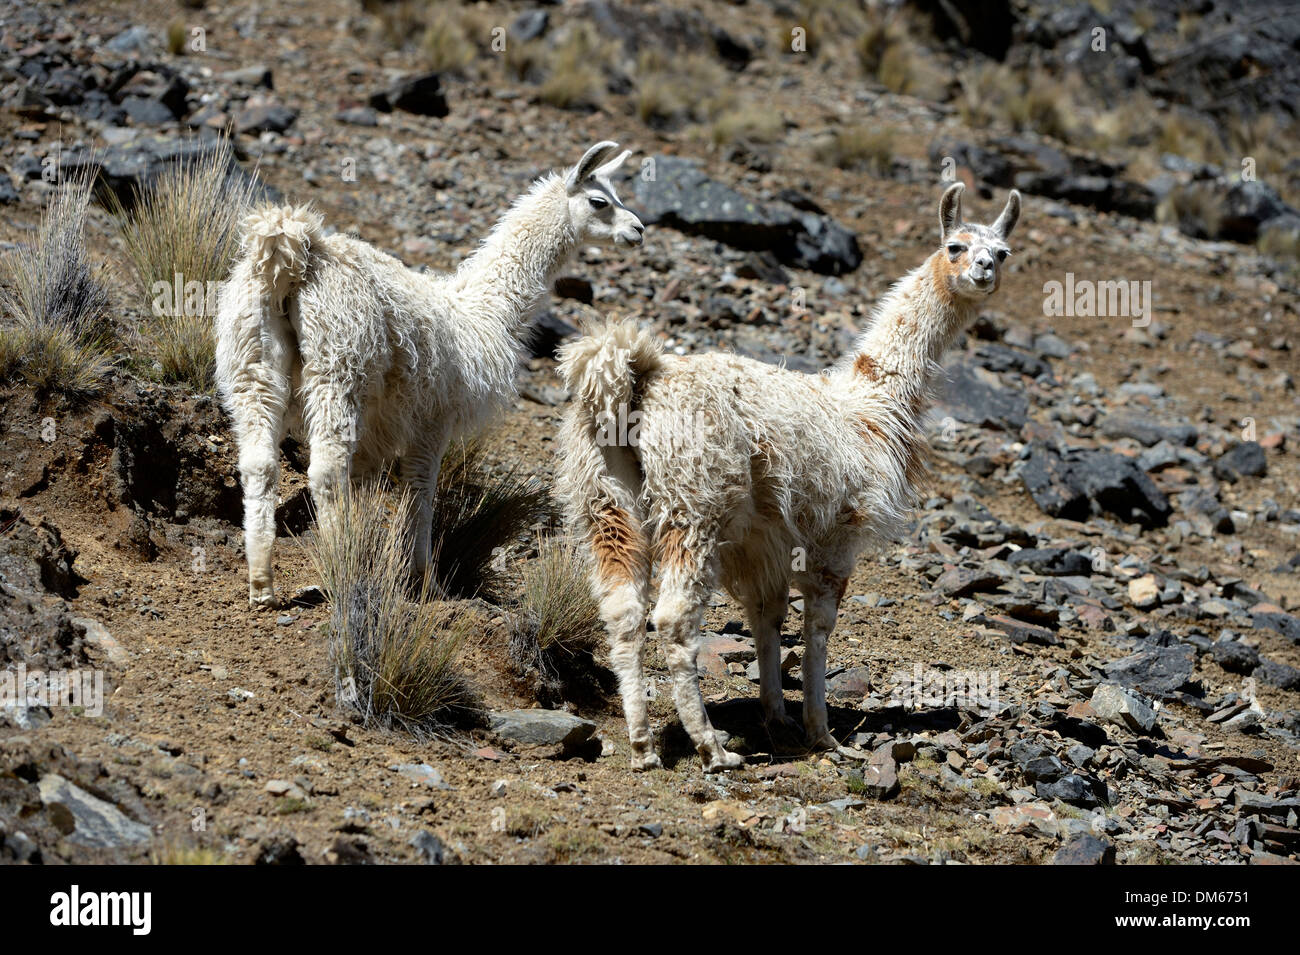 Two Llamas (Lama glama) standing in the Andean Highlands, Altiplano, Department of La Paz, Bolivia Stock Photo